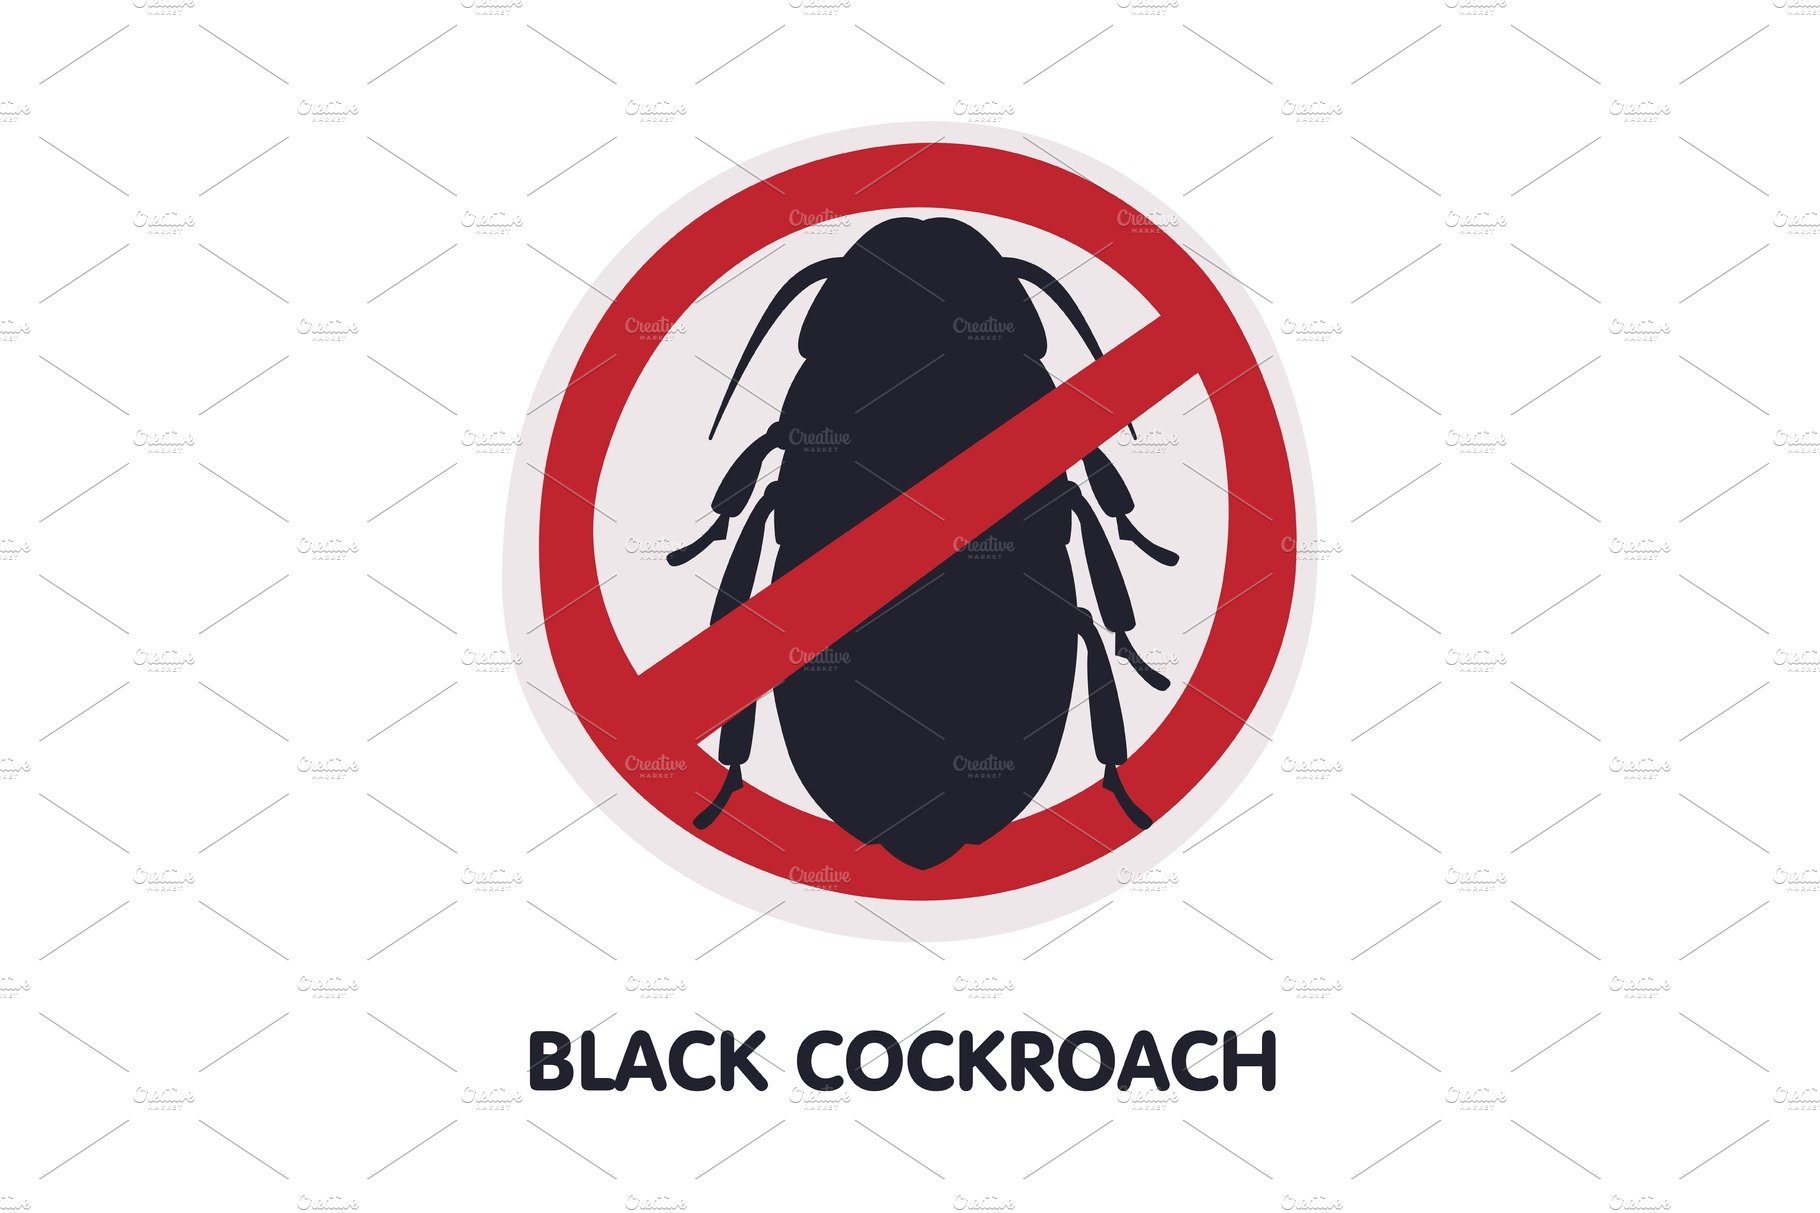 Black Cockroach Harmful Insect cover image.